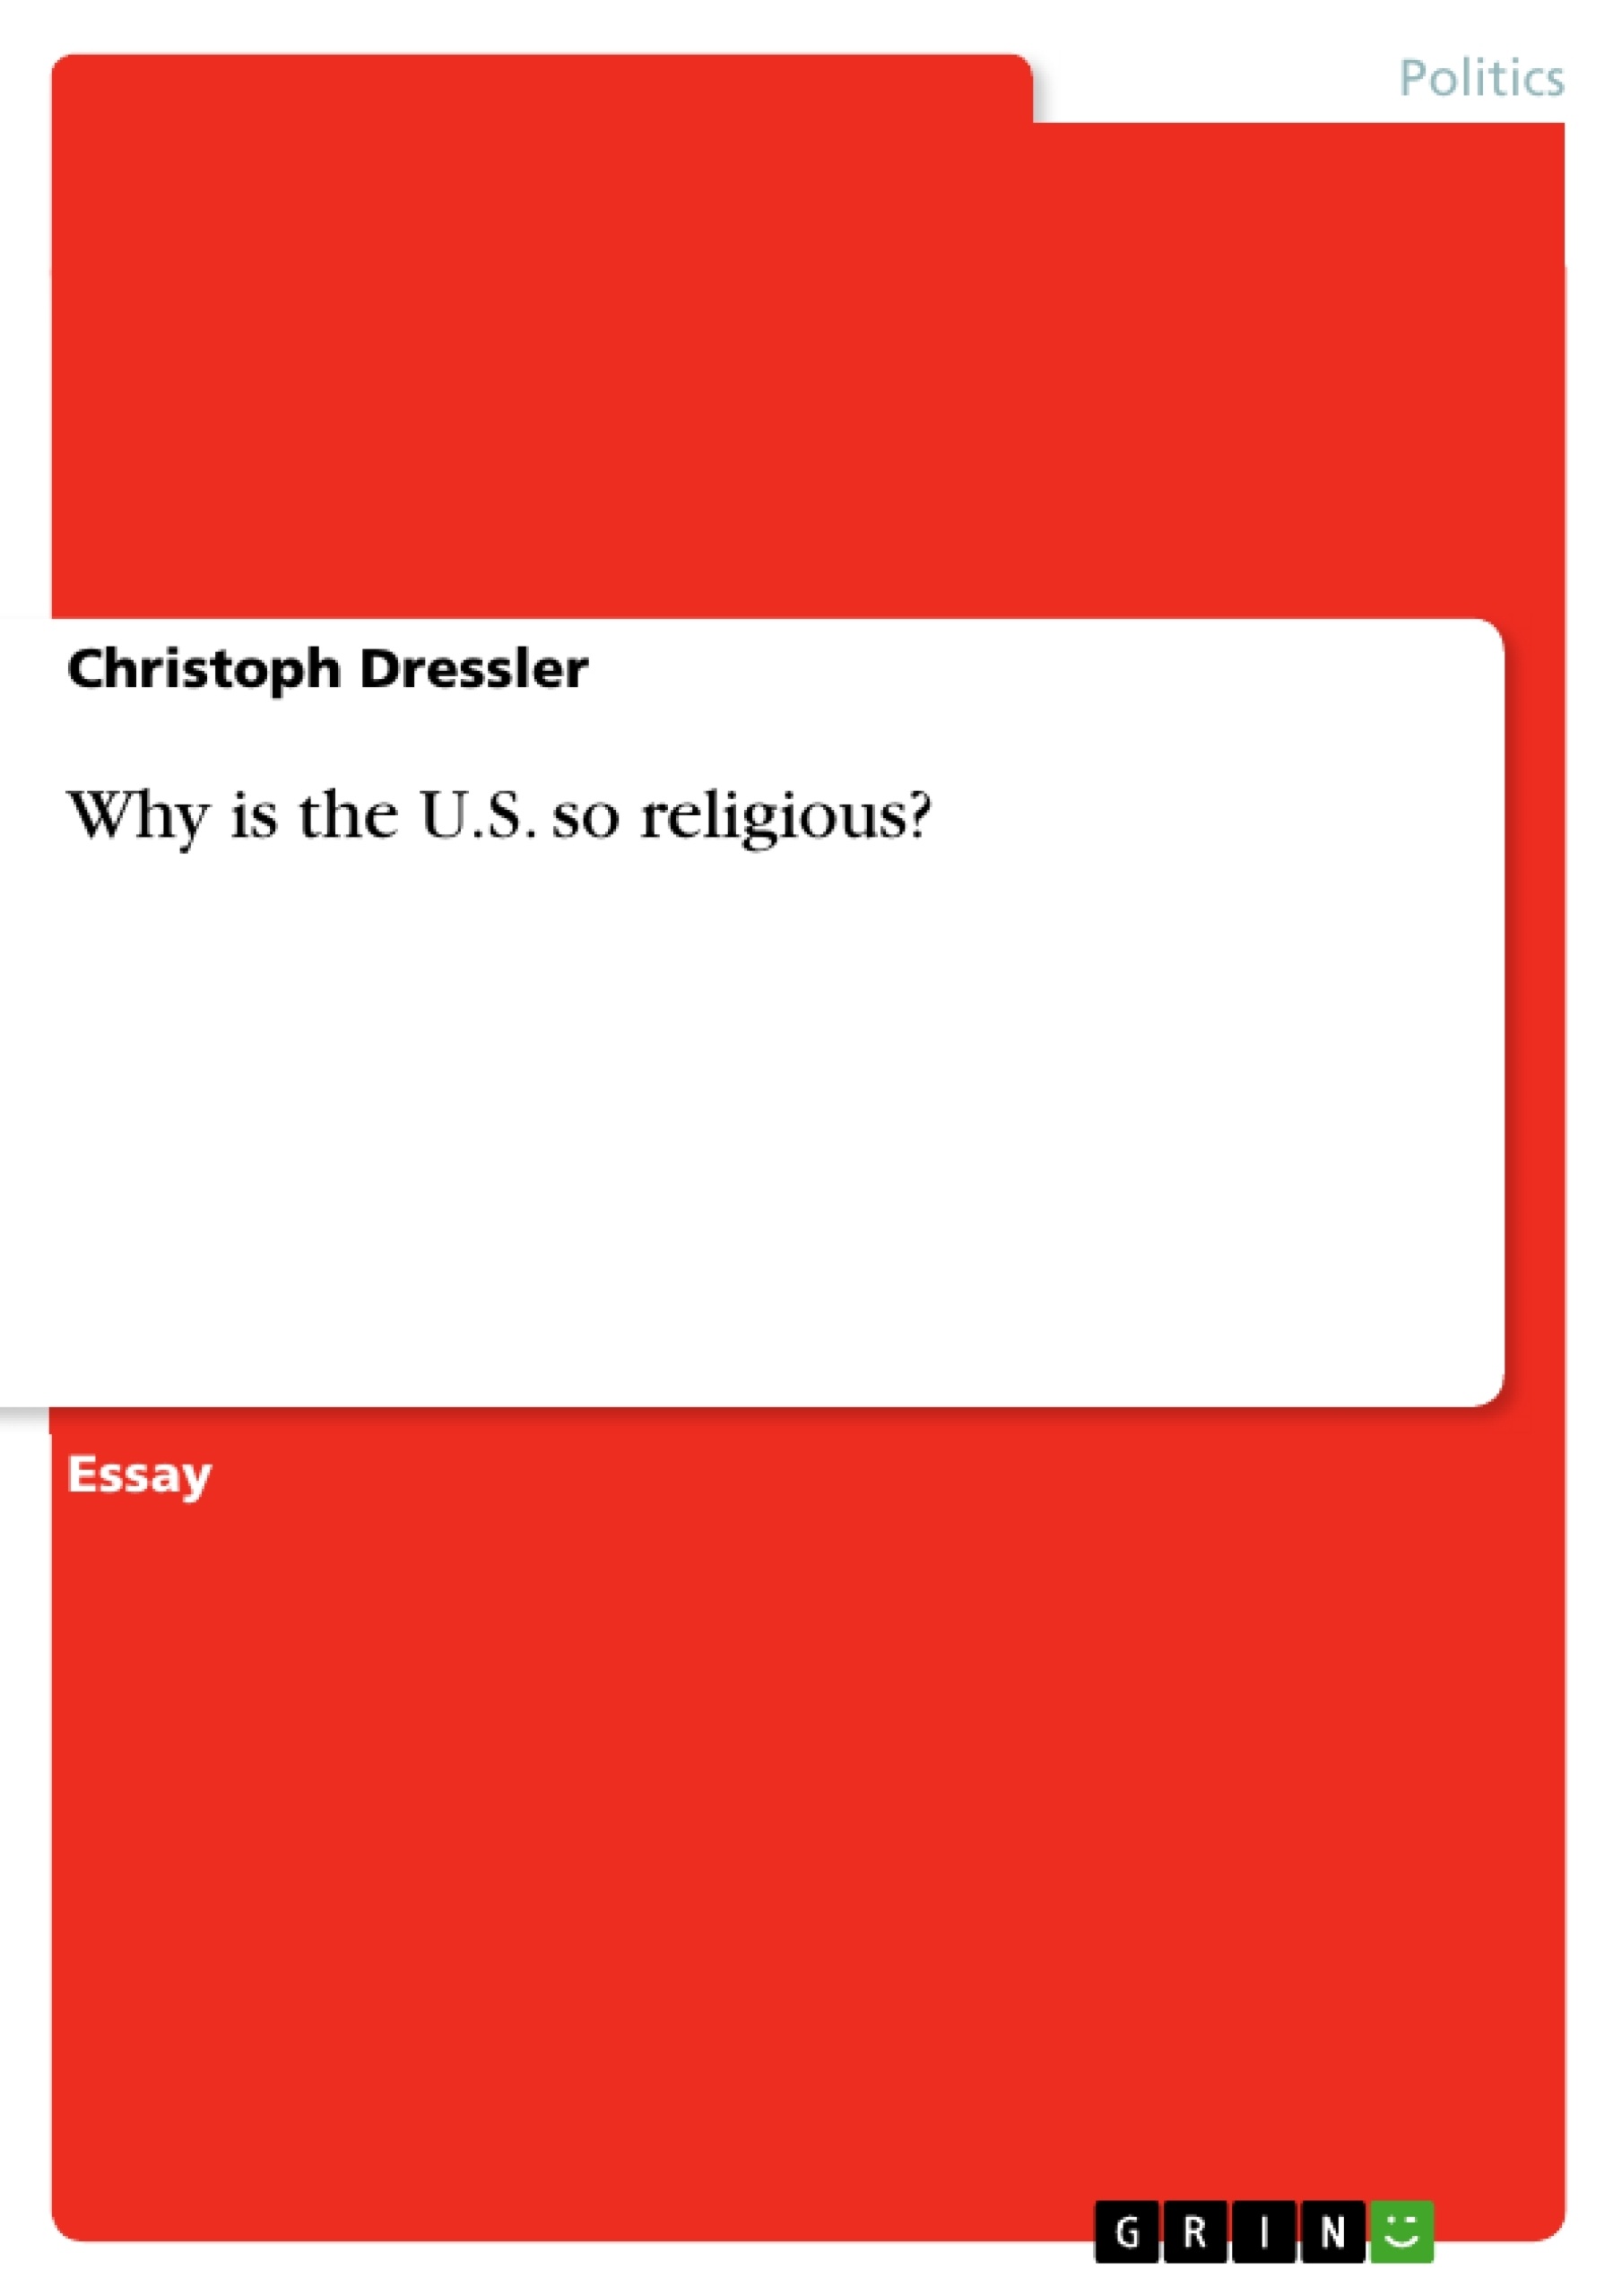 Titel: Why is the U.S. so religious?